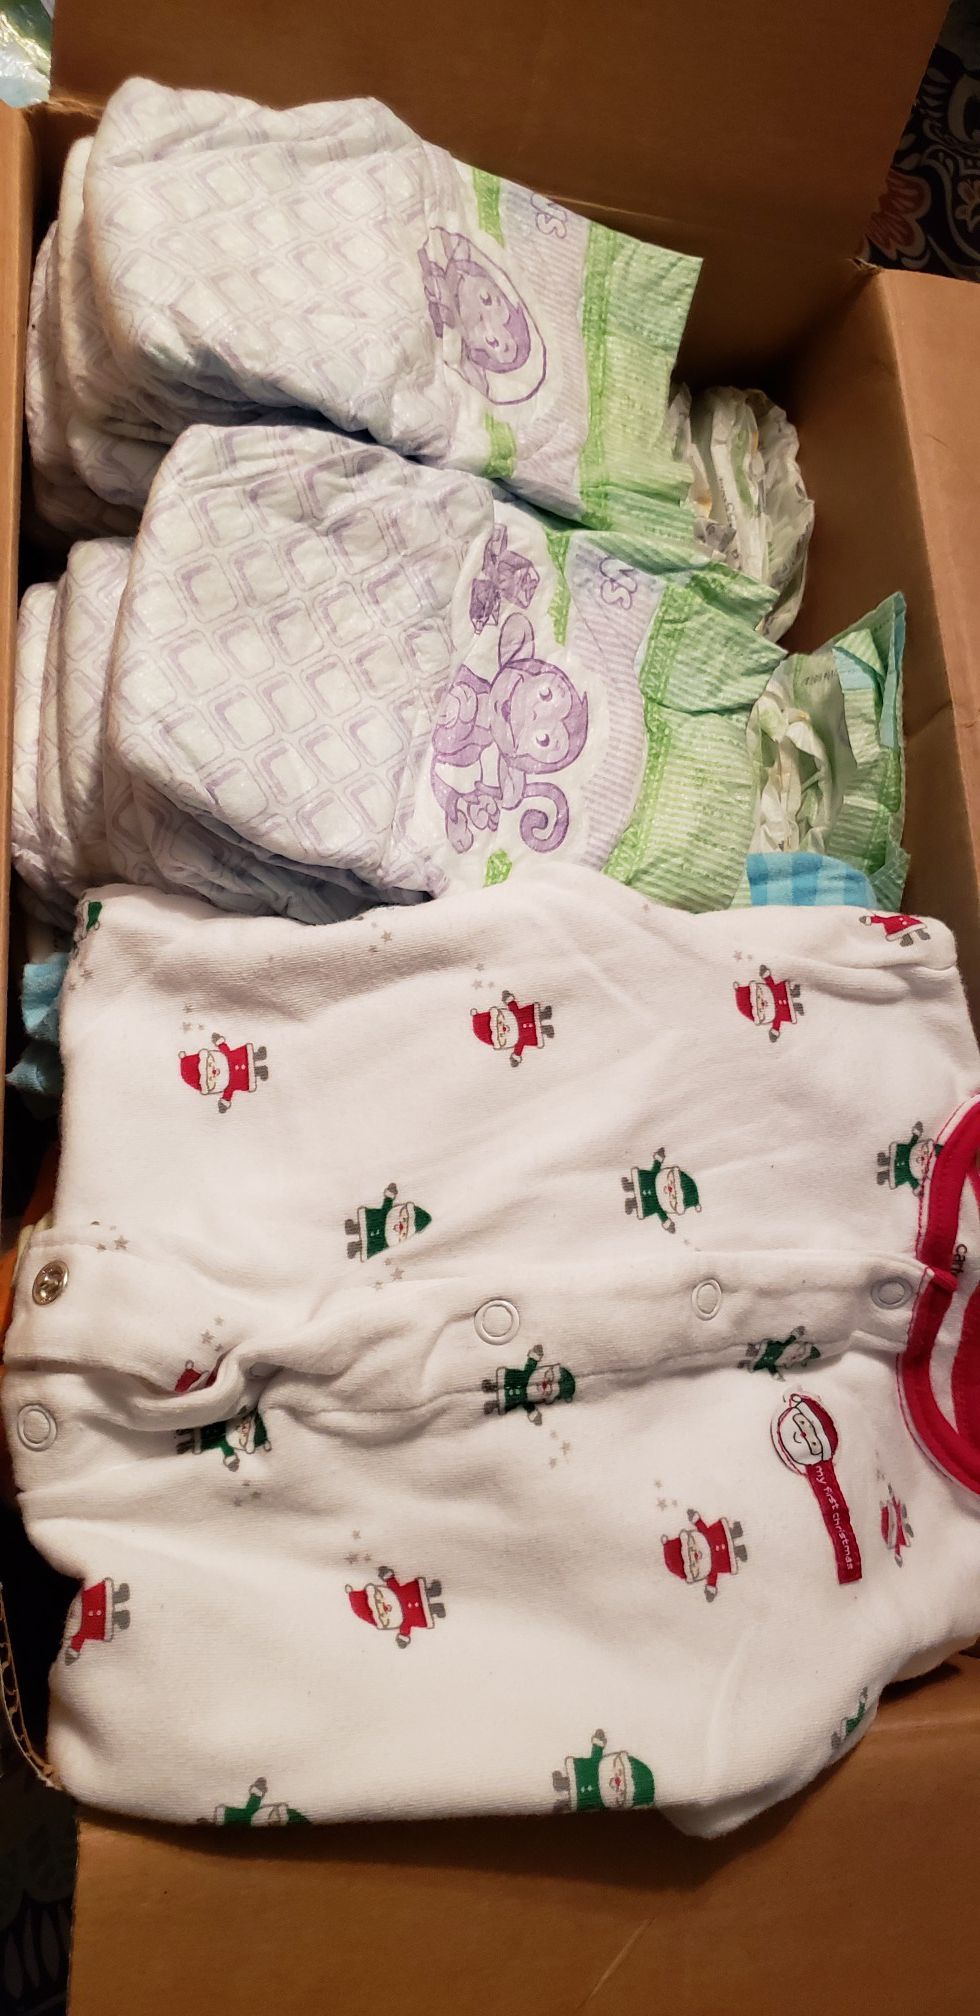 New born boy 16 onies,2 t-shirts,3 pants,5 foot in onies,57 new born Pampers brand new. Slightly worn and new clothes.